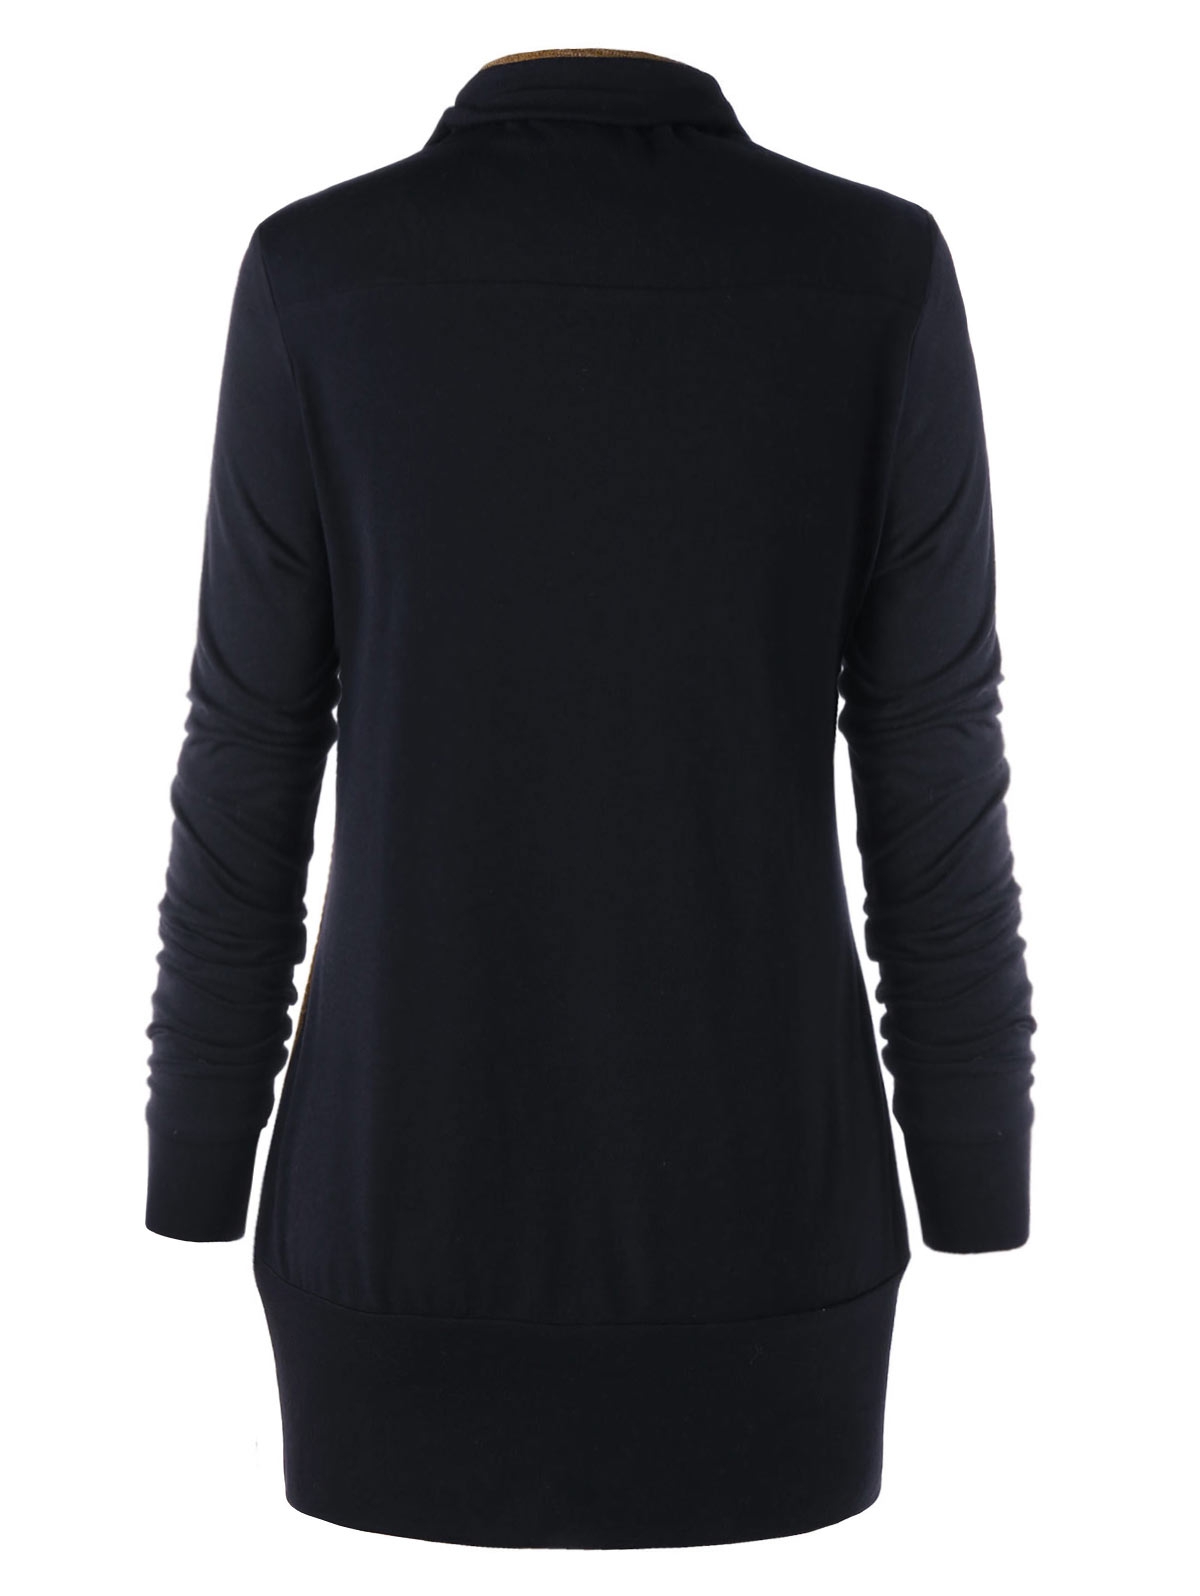 Details about Plus Size Heap Collar Tunic Sweatshirt with Buttons.